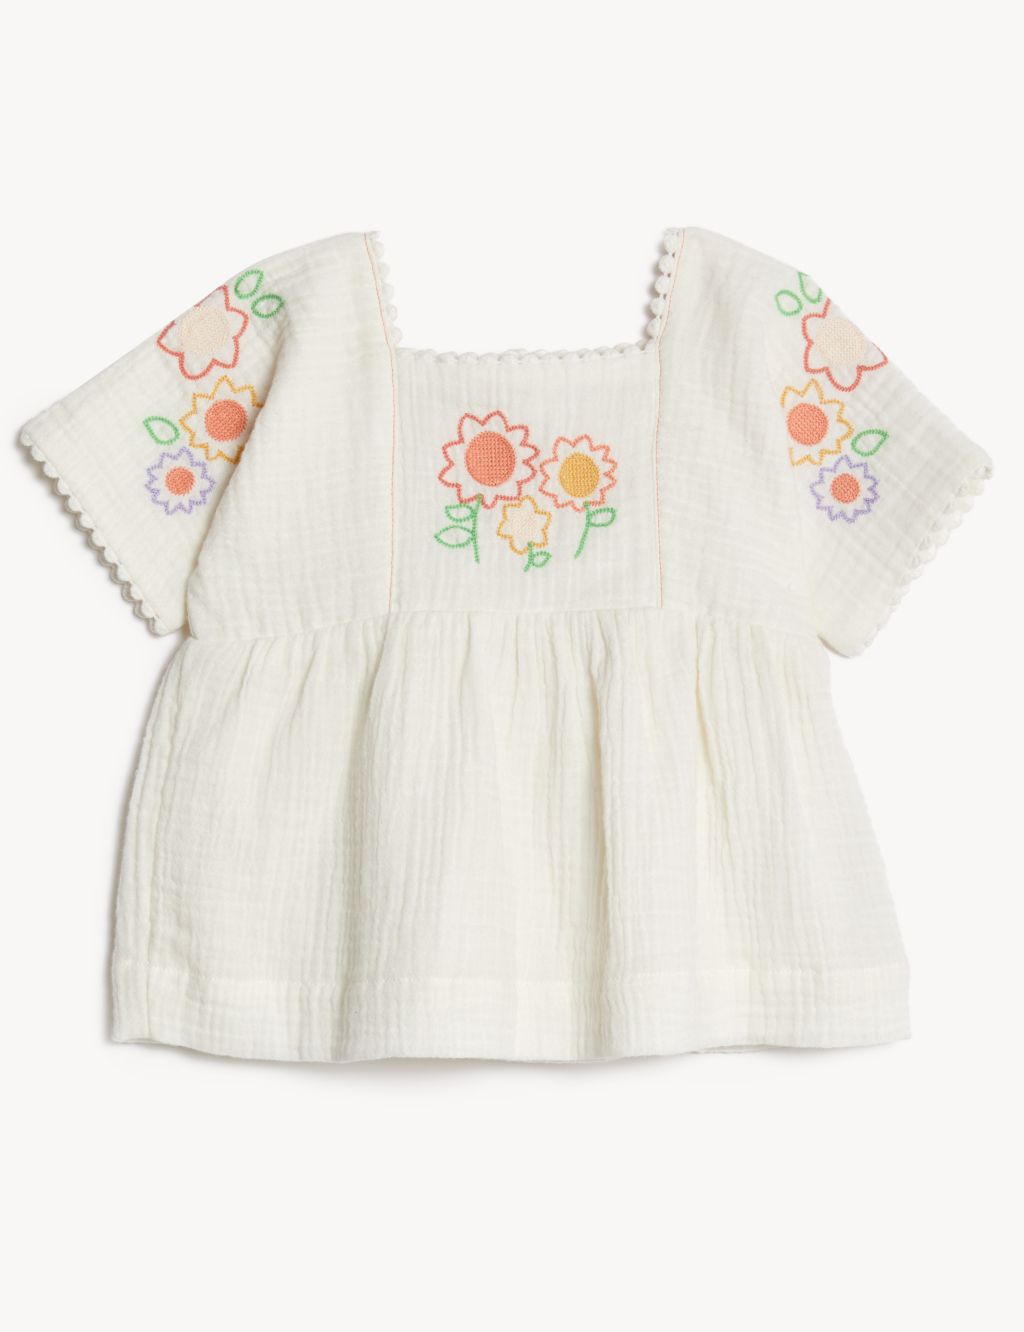 2pc Pure Cotton Floral Outfit (0-3 Yrs) image 3